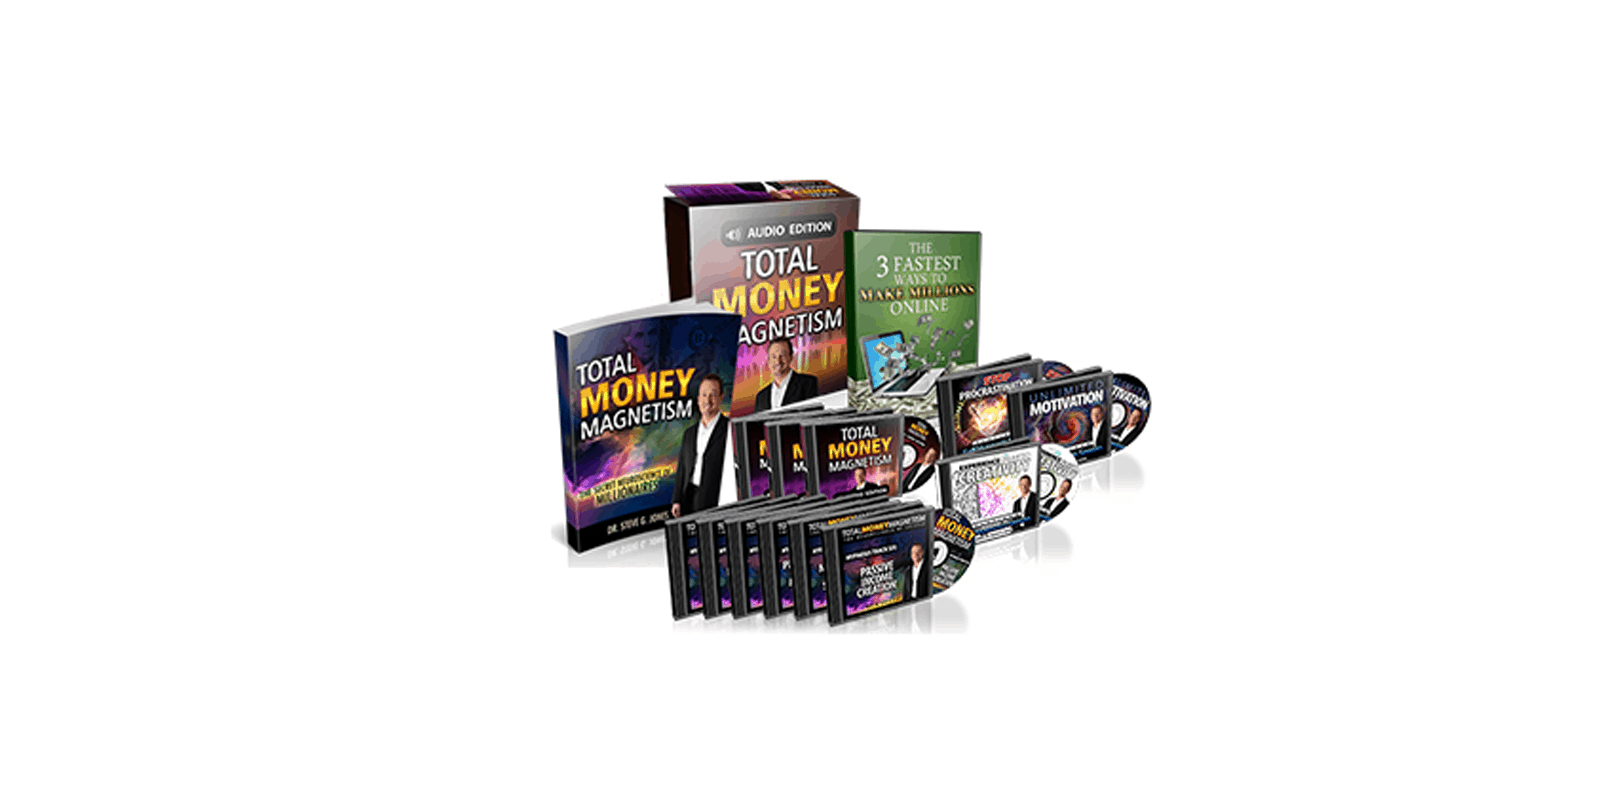 Total Money Magnetism reviews